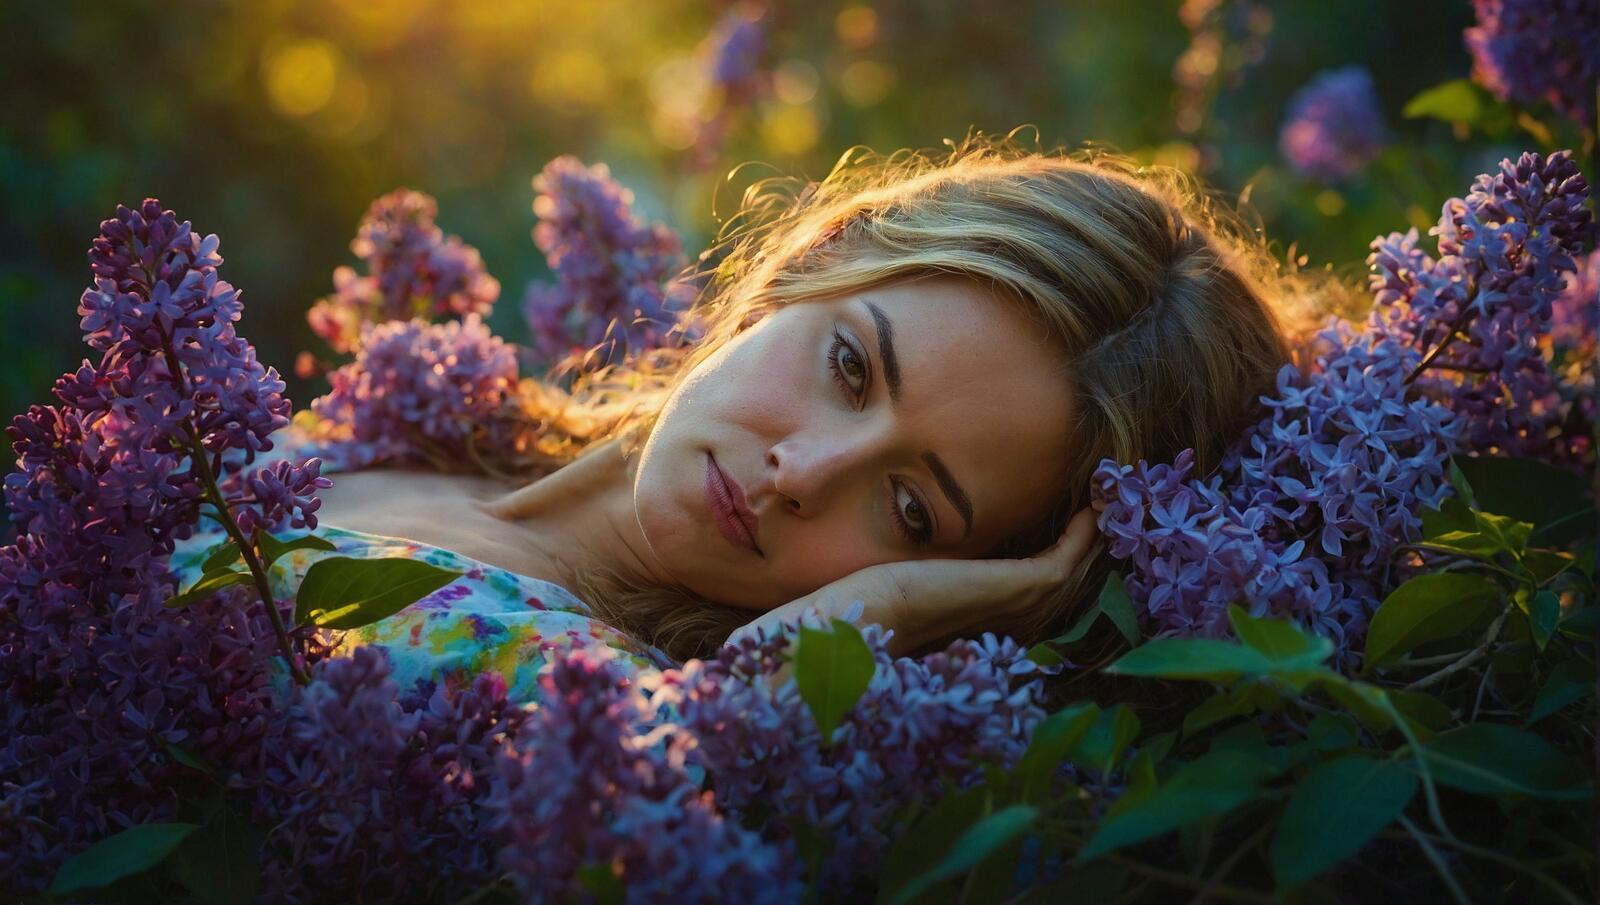 Free photo A woman relaxes with purple flowers all around her